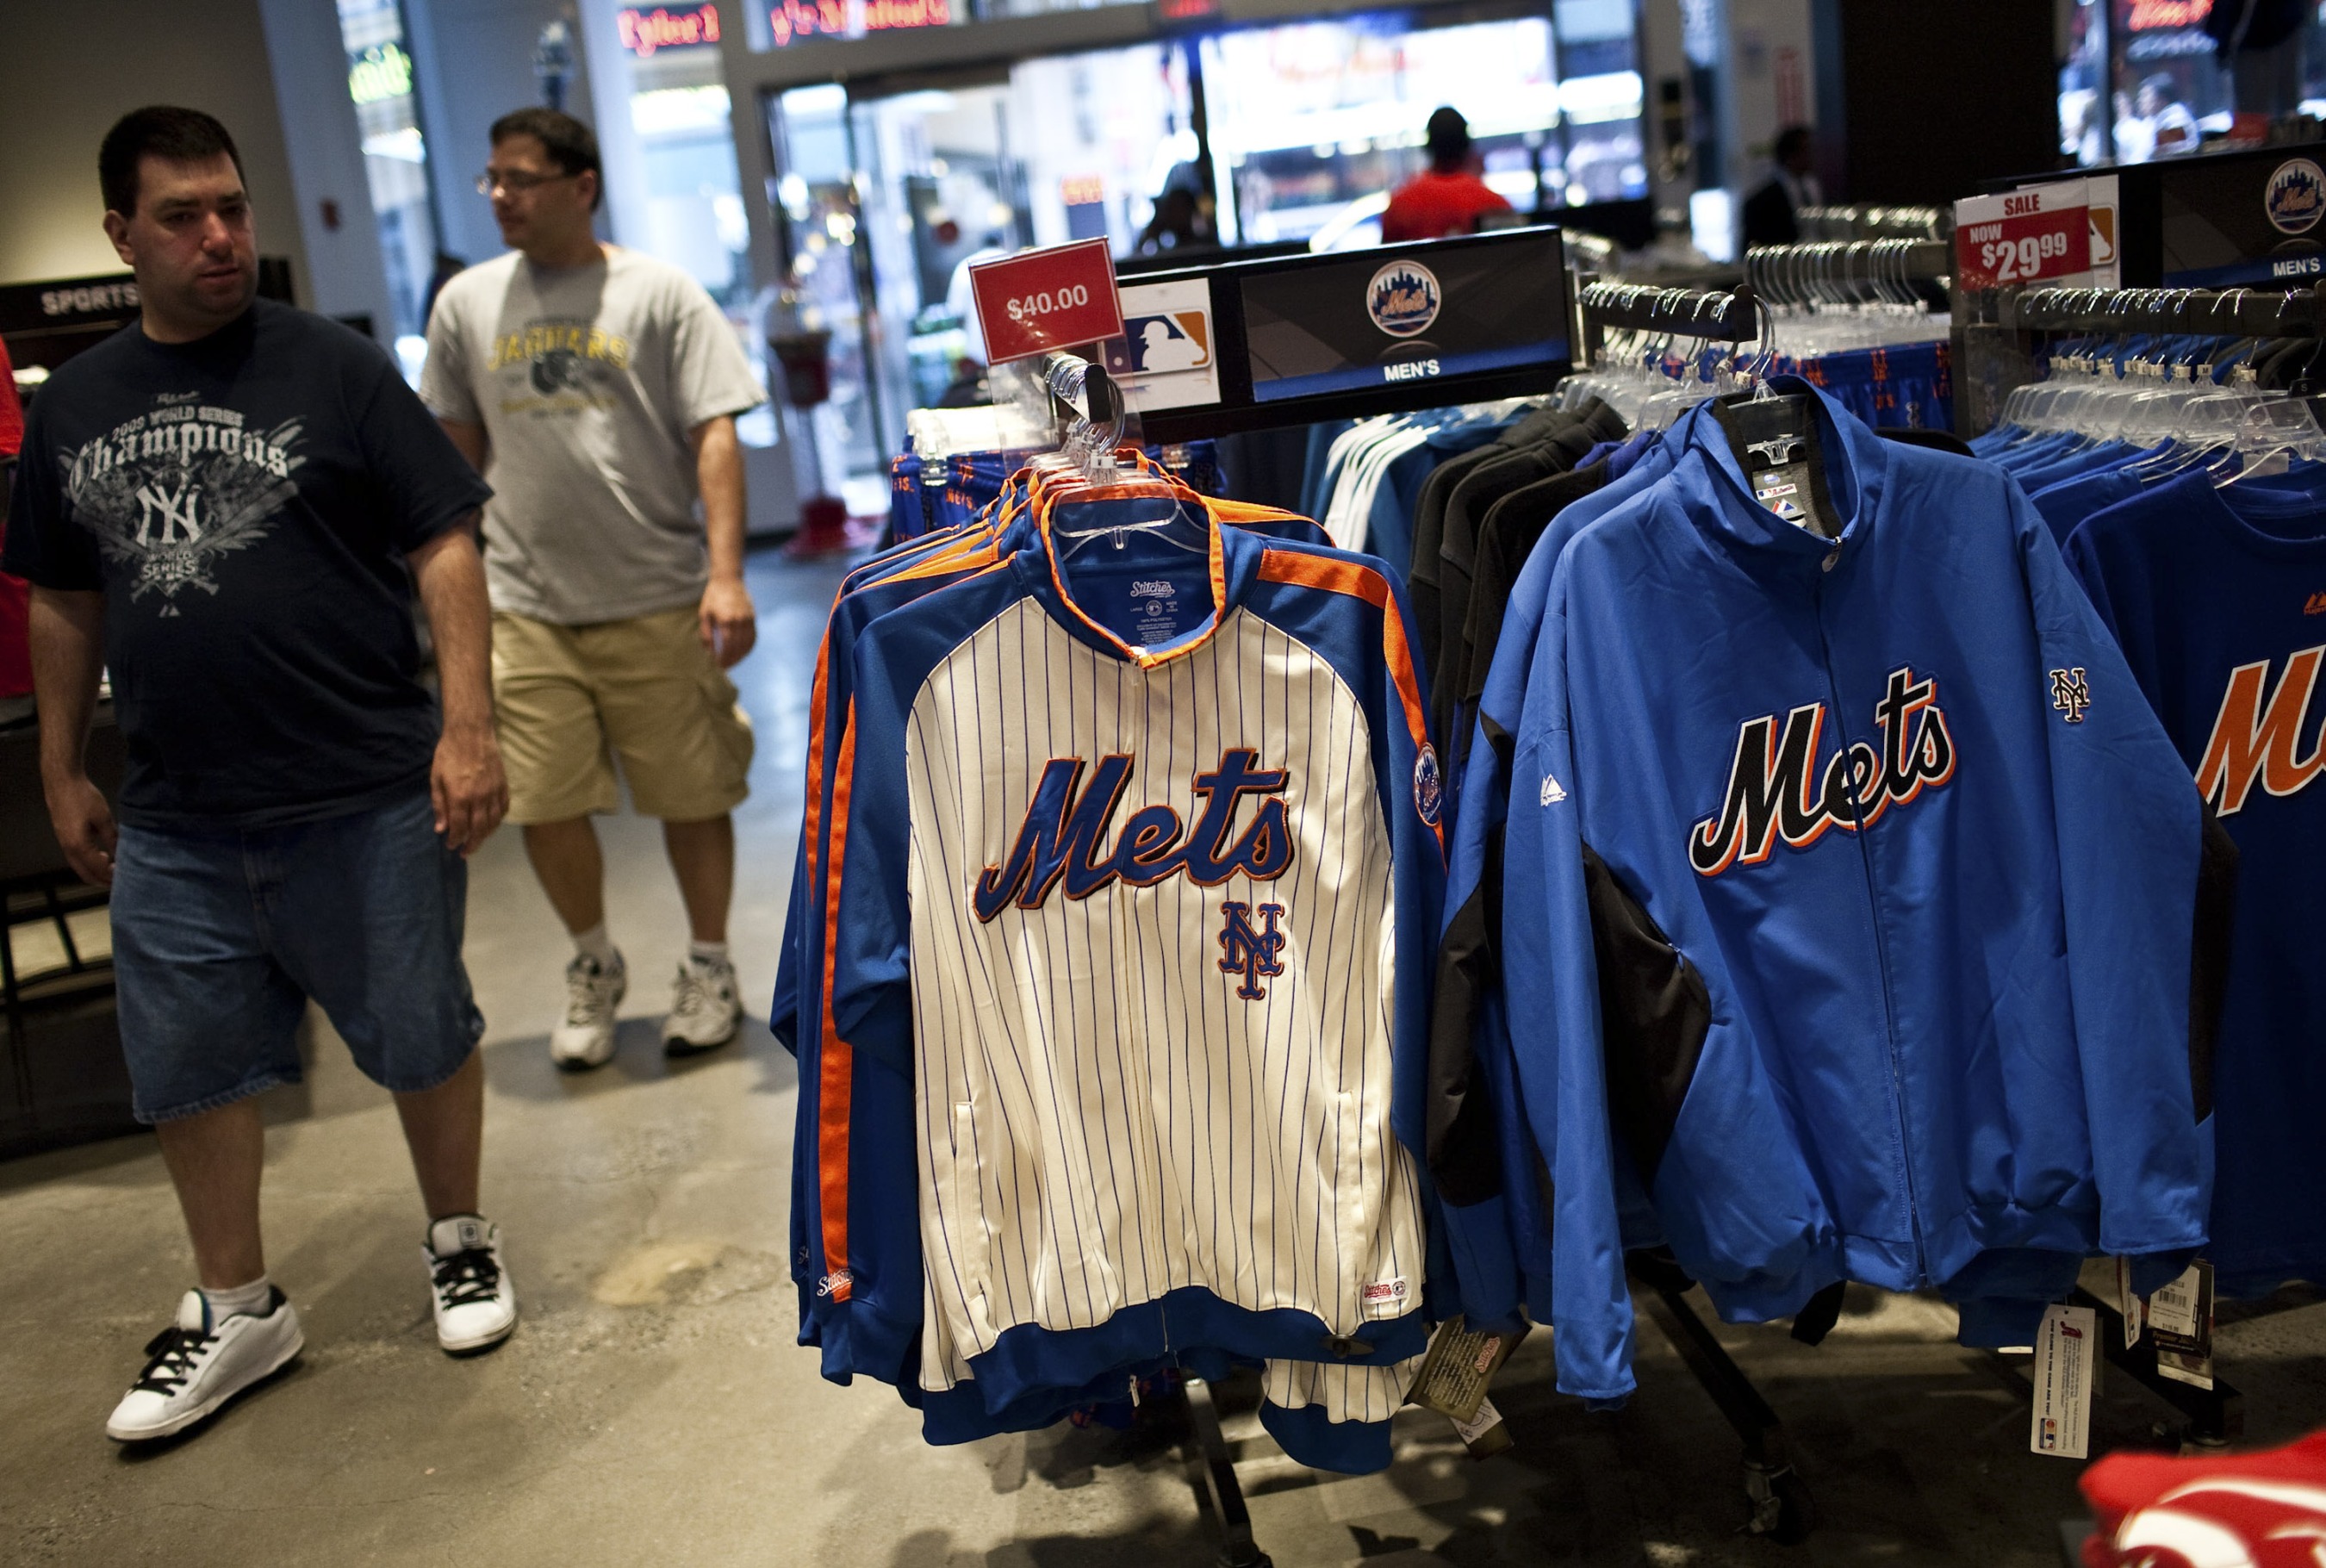 Modell's Sporting Goods Files for Bankruptcy, Closing All Stores